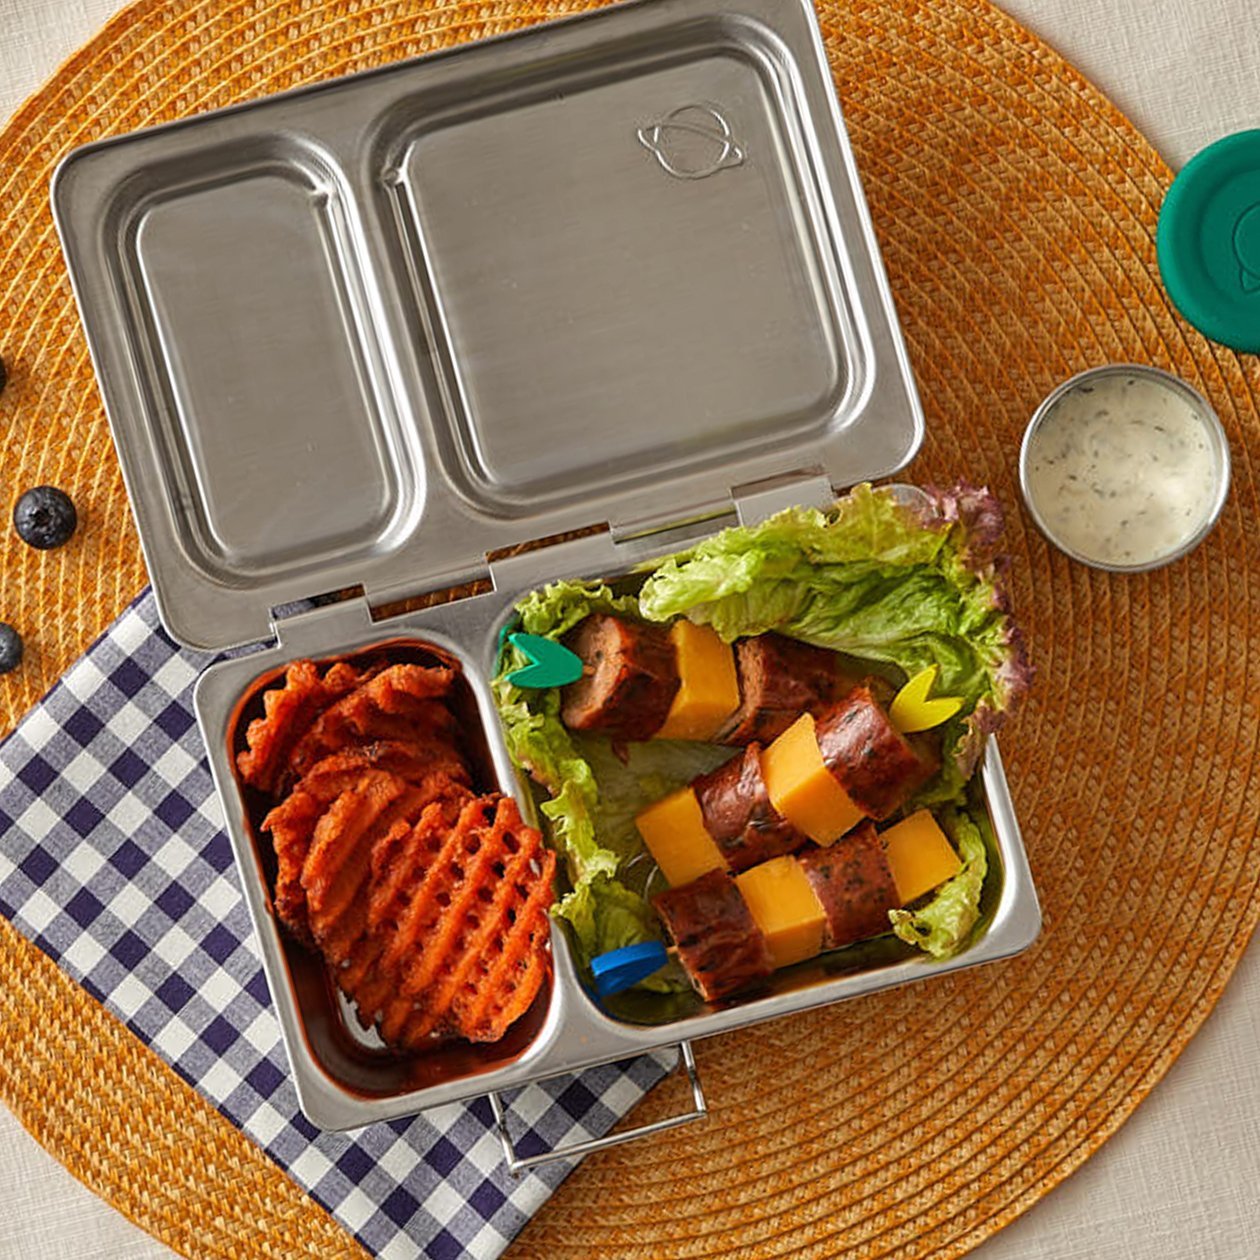 Planetbox Stainless Steel Lunchbox Shuttle - Urban Naturals